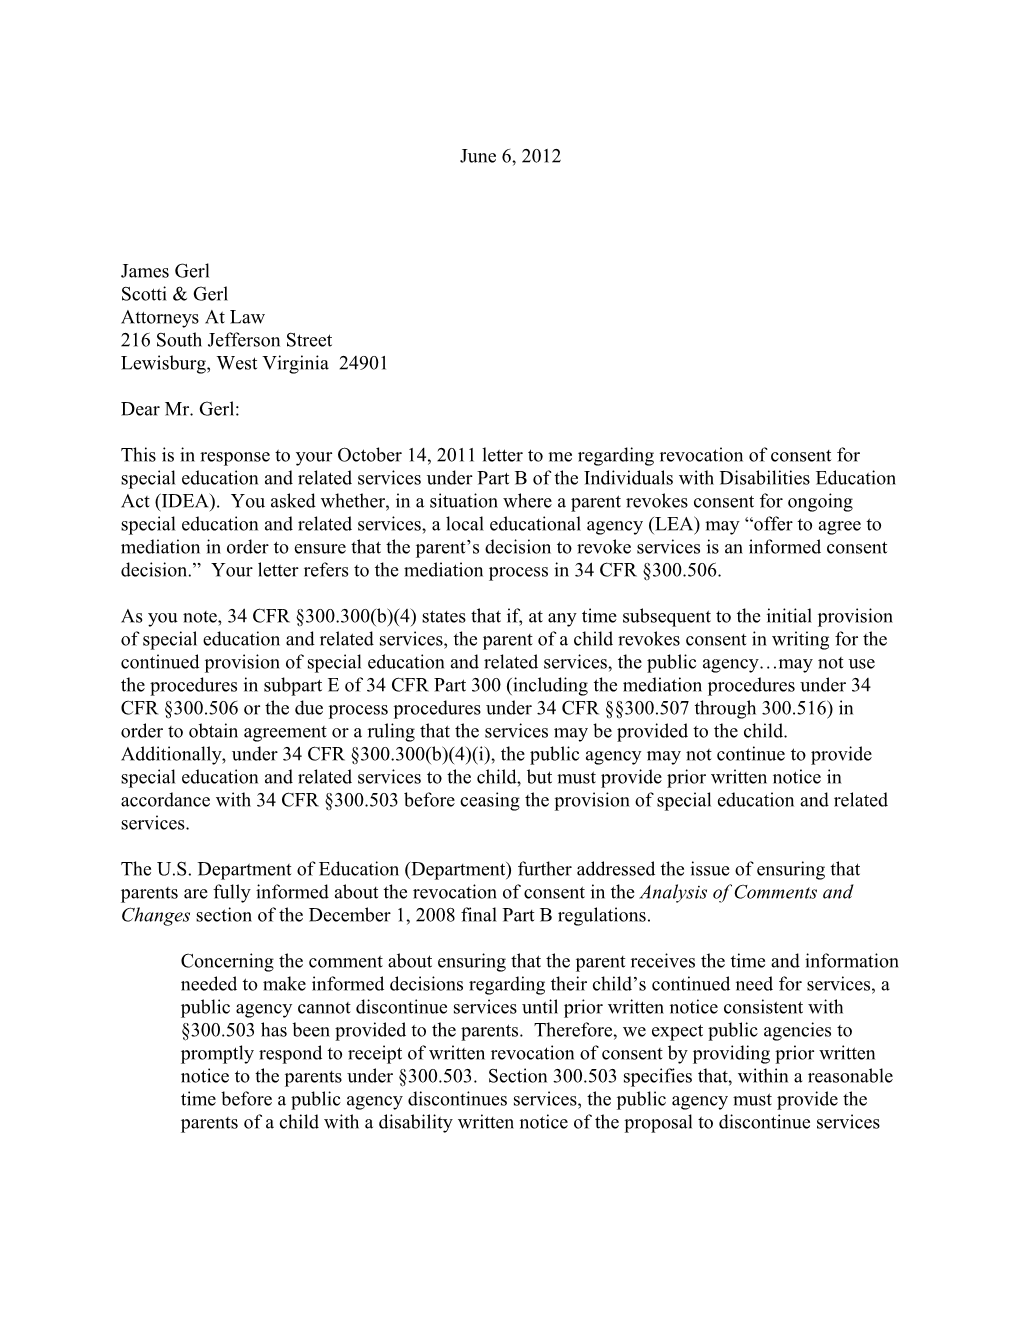 OSEP Policy Letter Dated June 6, 2012 (MS Word)